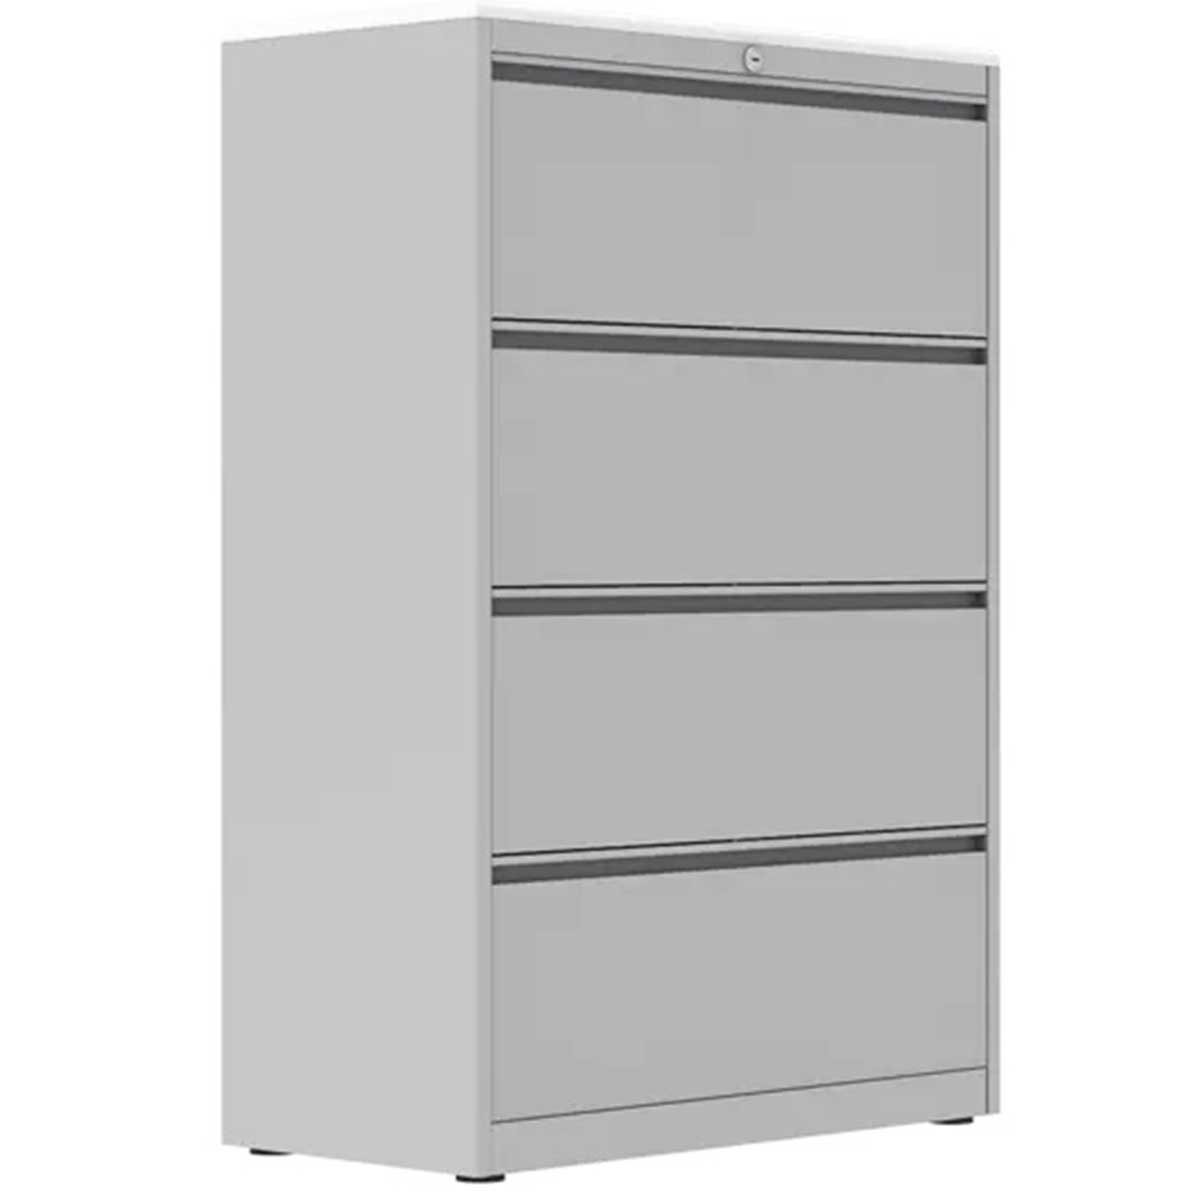 Fire Resistant File Cabinet Manufacturers, Suppliers in Pitampura